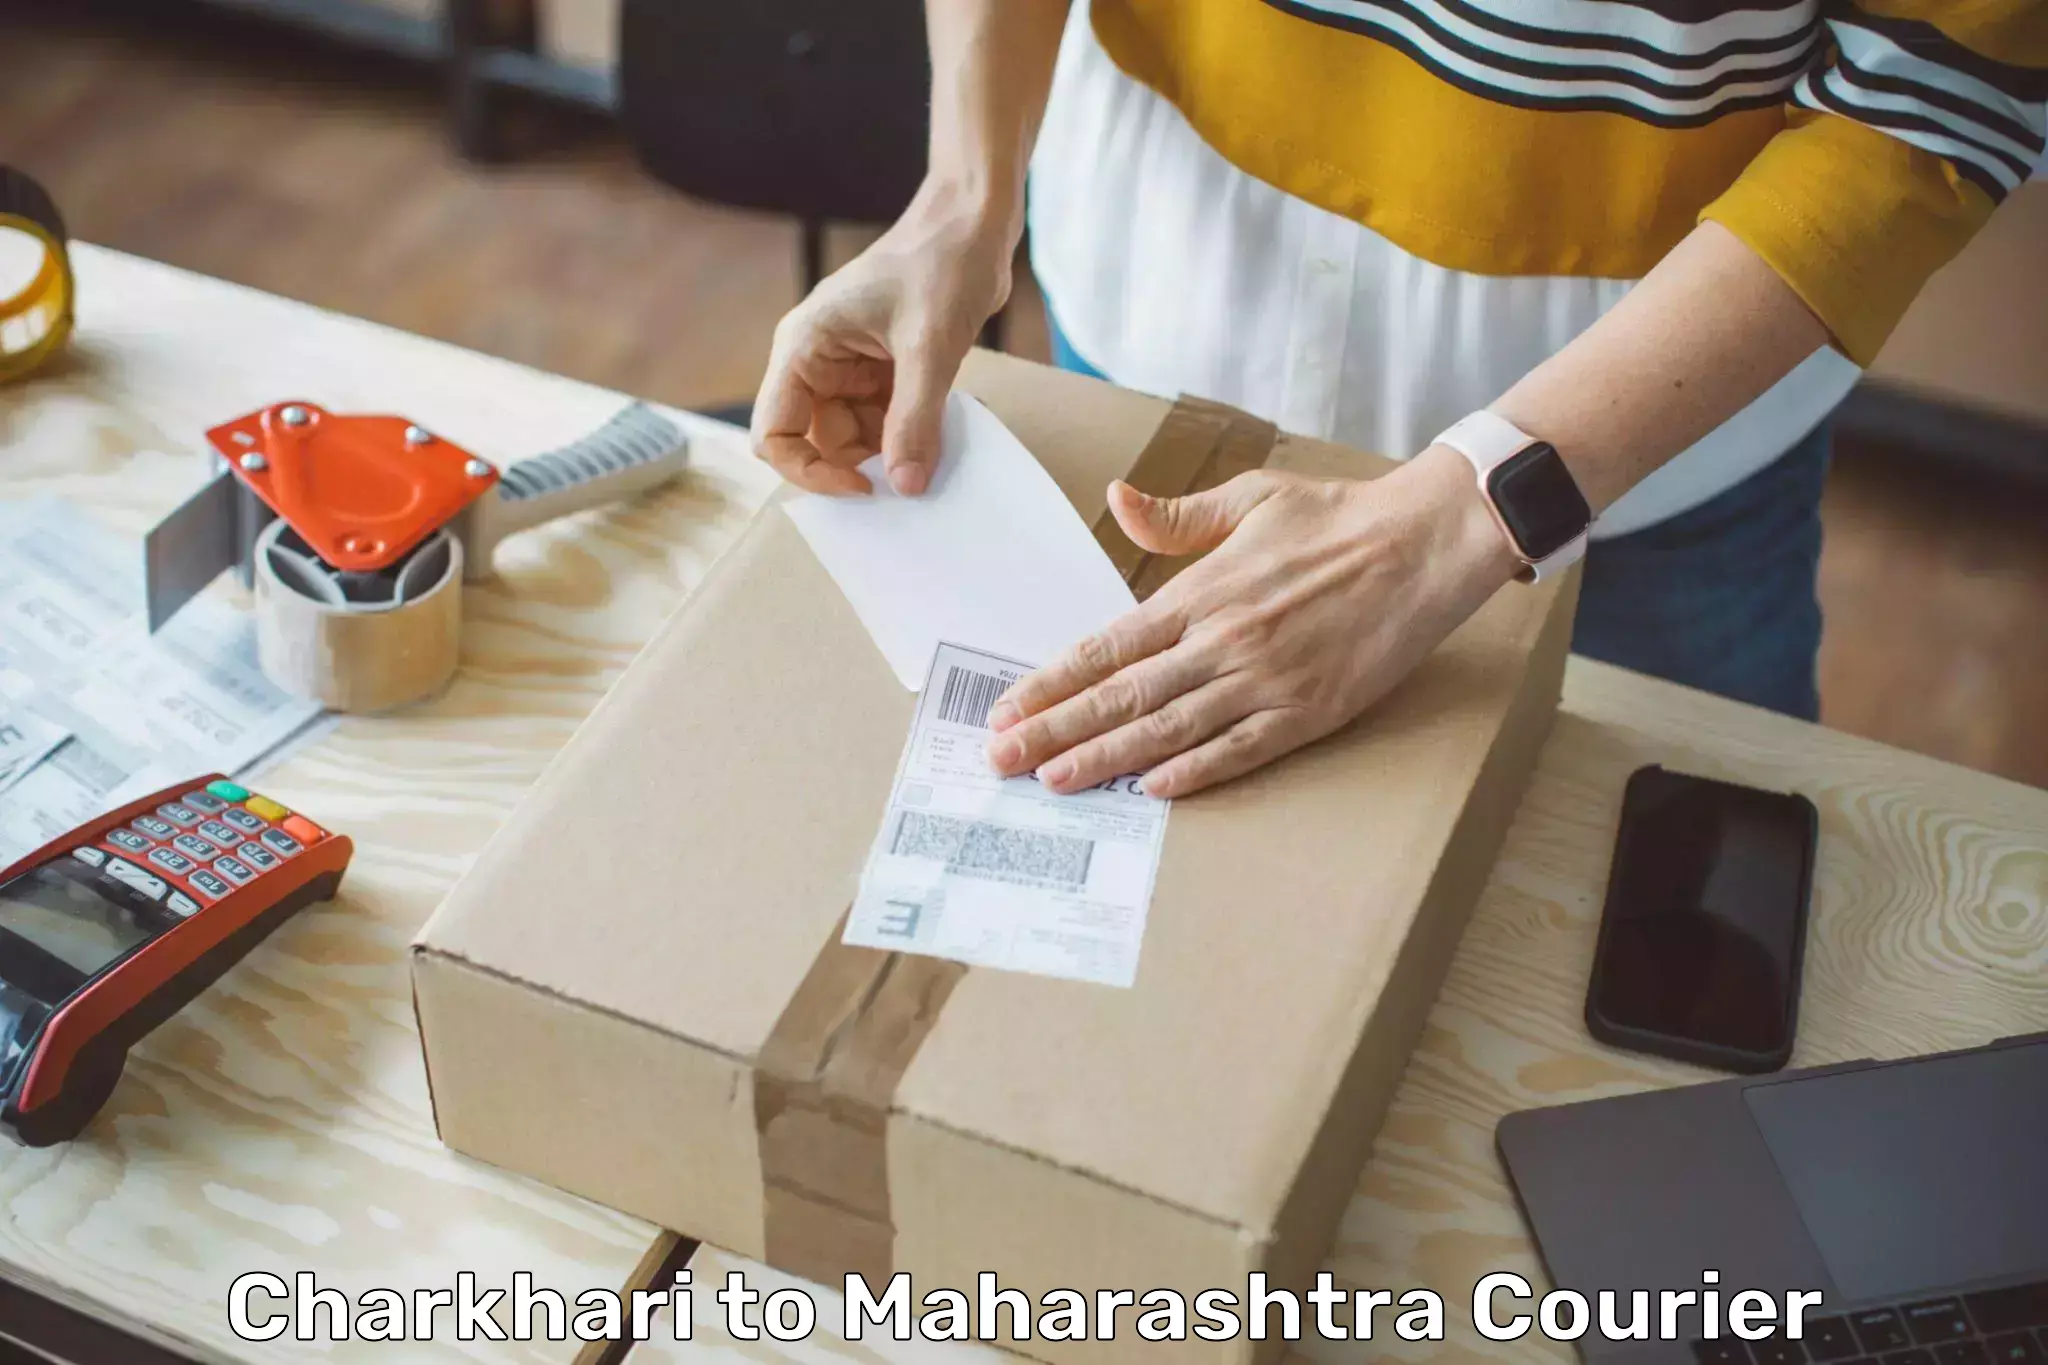 Customer-focused courier Charkhari to Sindhudurg